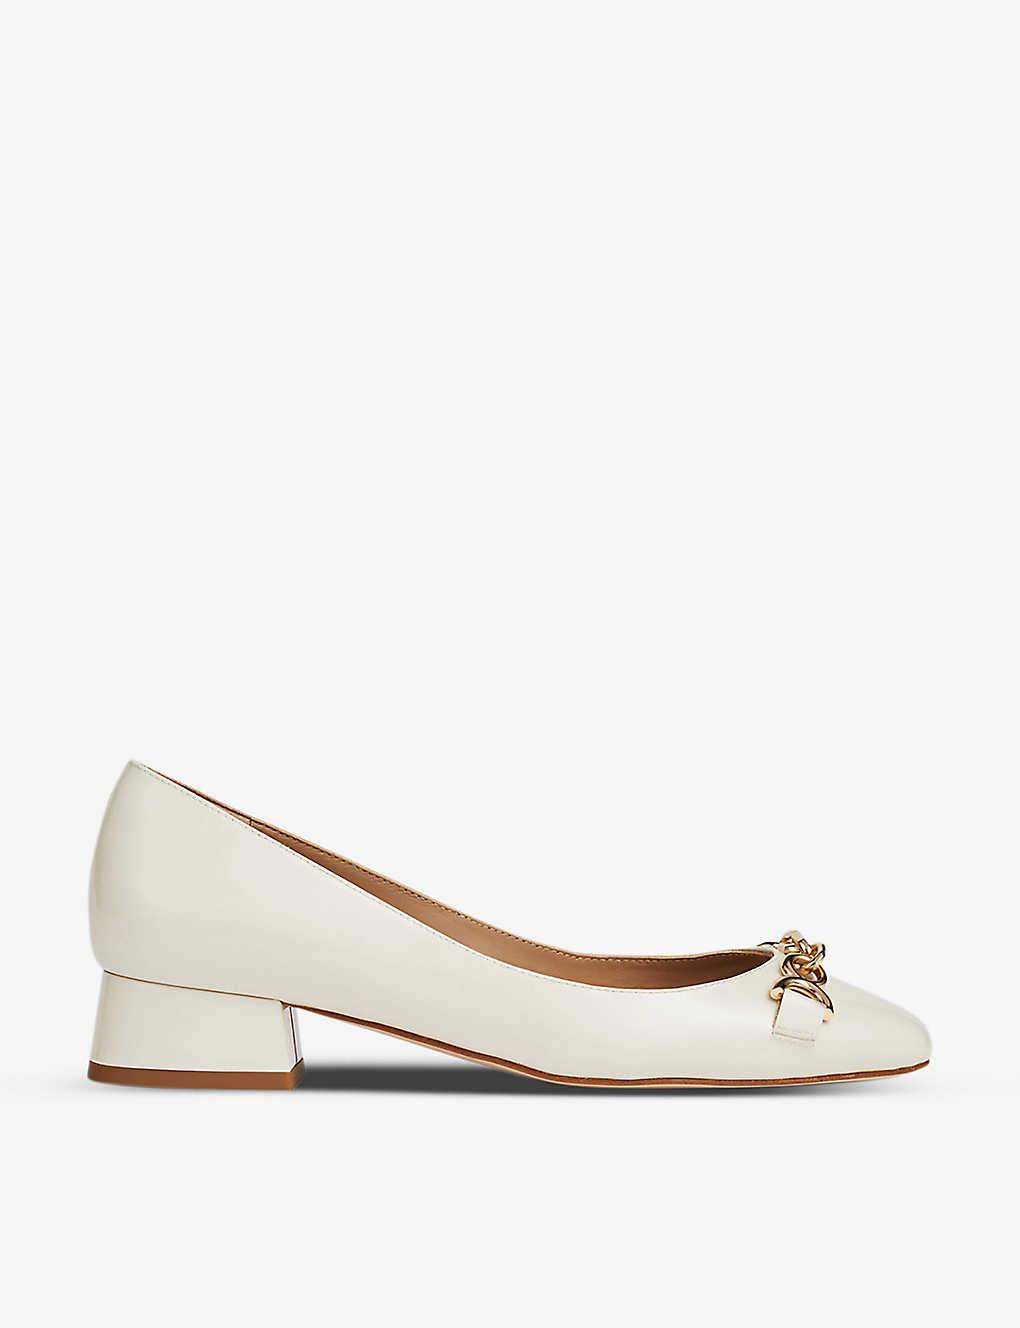 LK Bennett Blakely Snaffle Patent-leather Pumps in Natural | Lyst